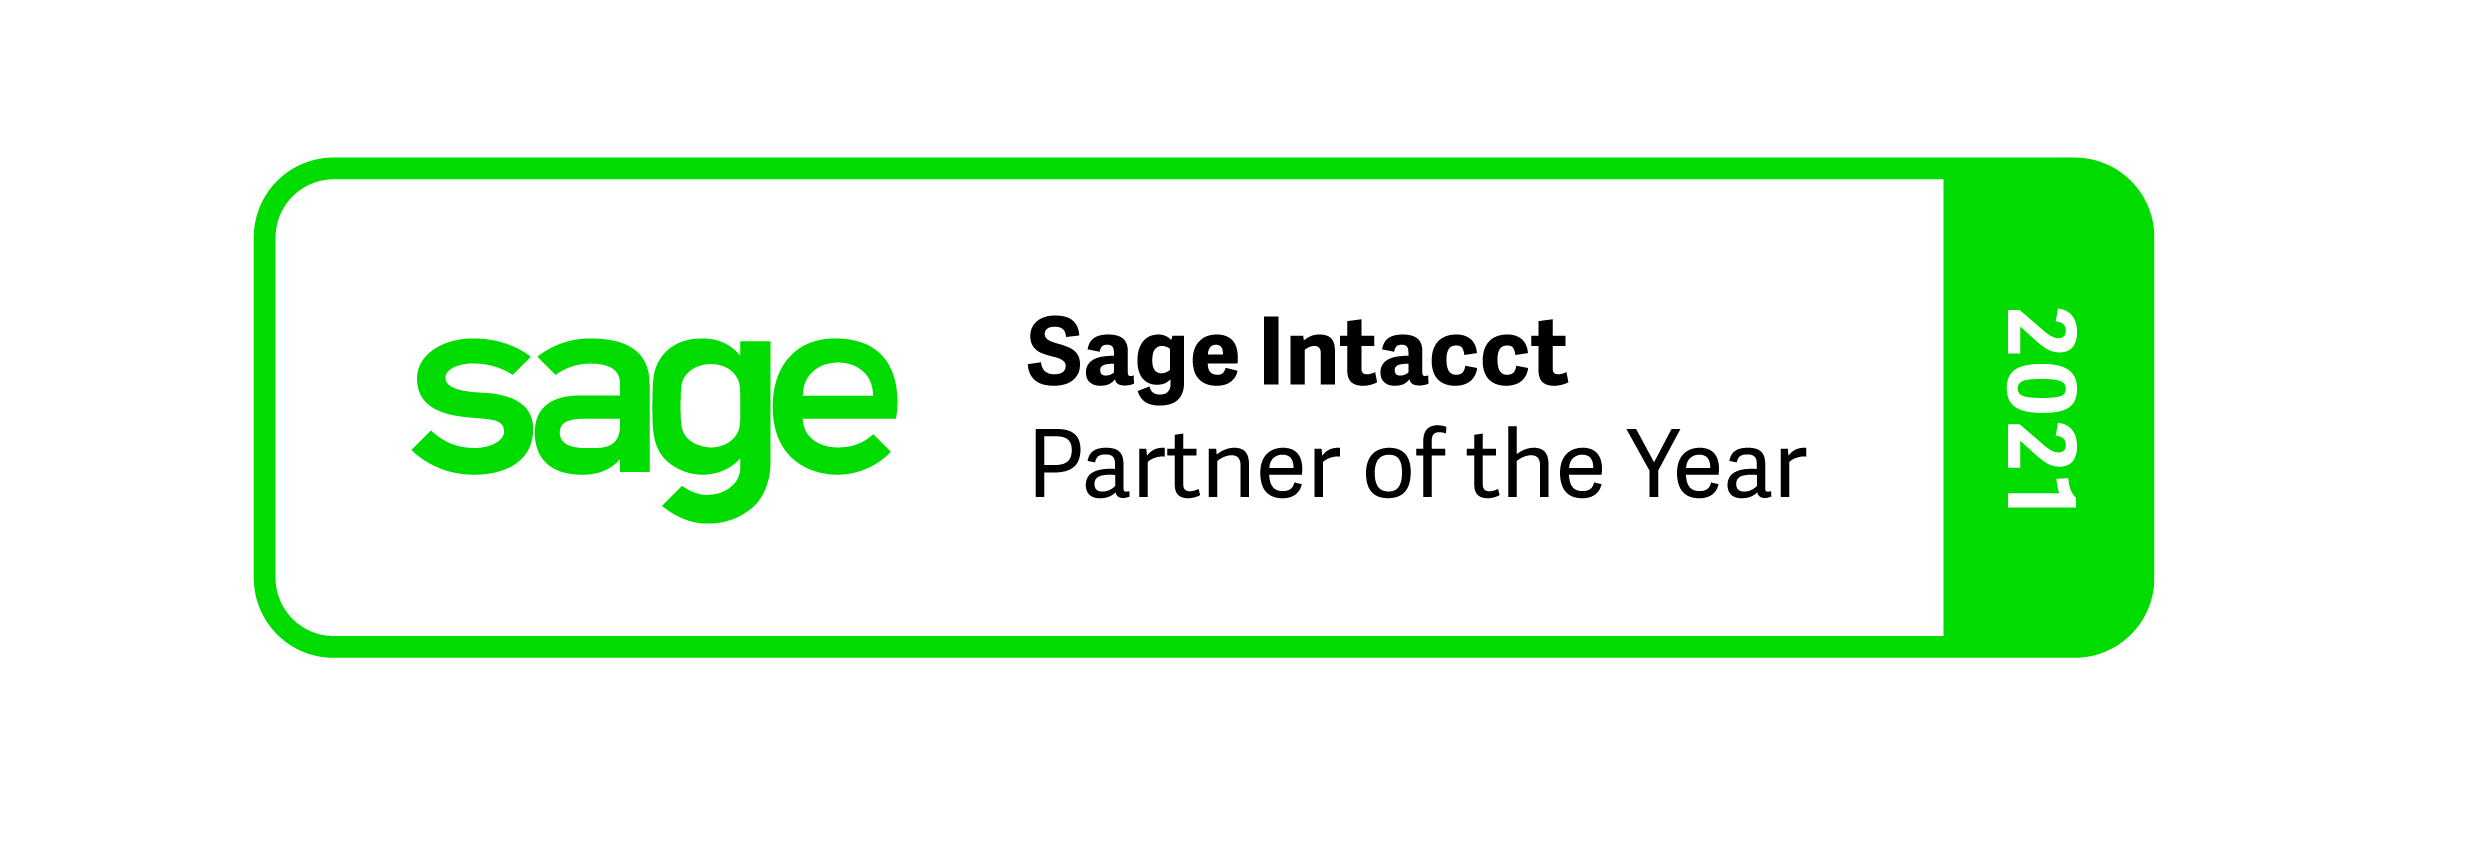 Sage Intacct Partner of the Year 2021